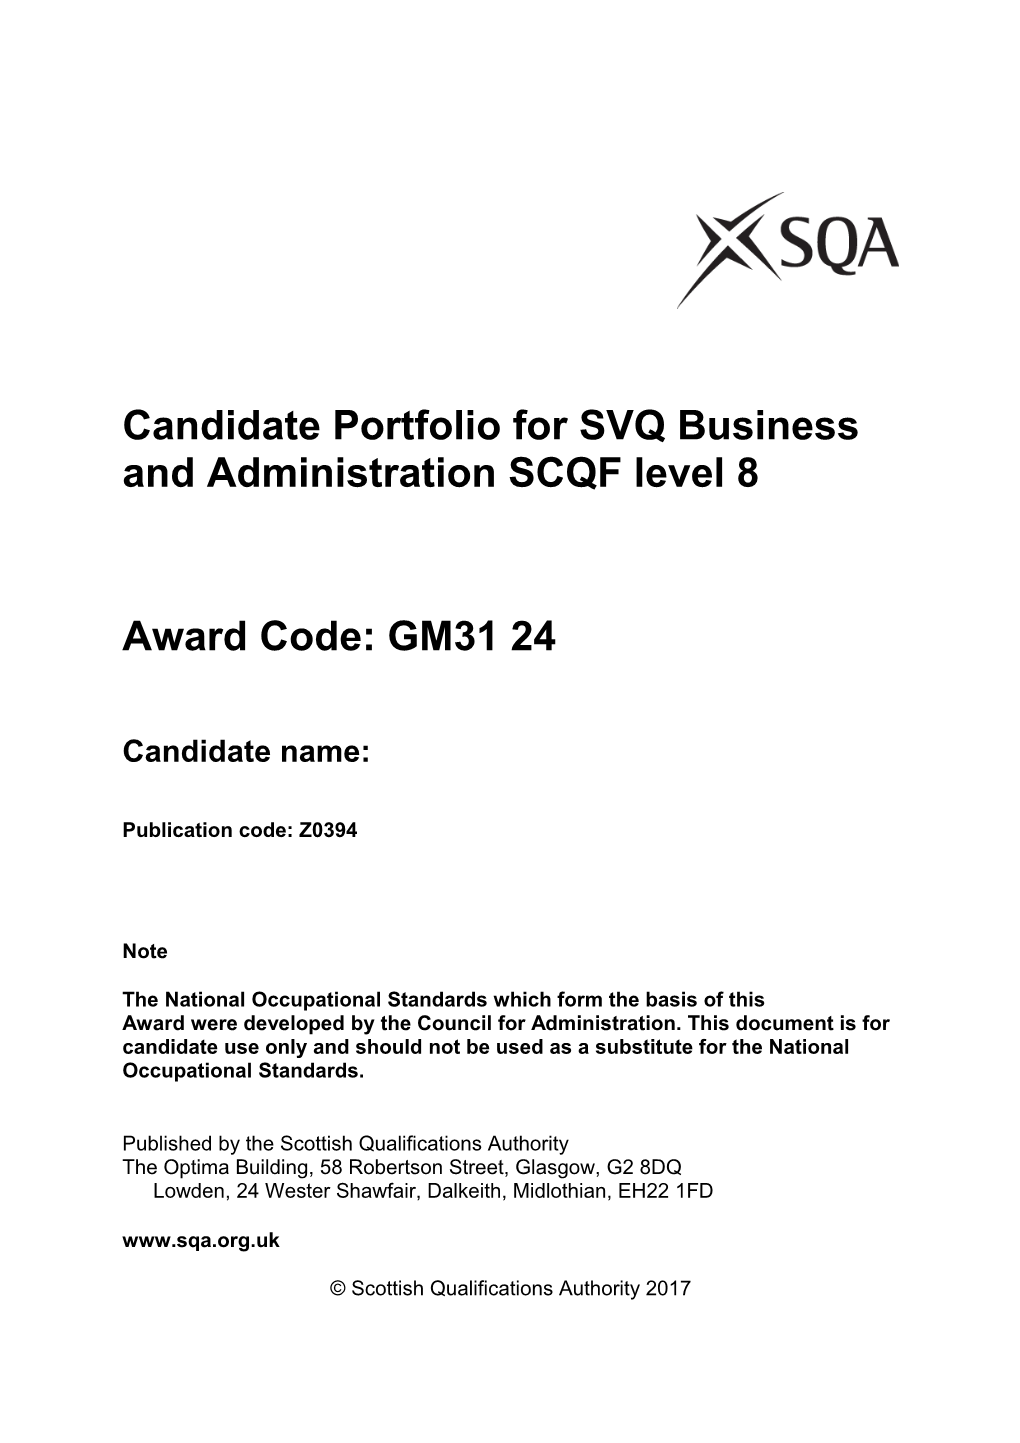 Candidate Portfolio for SVQ Business and Administration SCQF Level 8